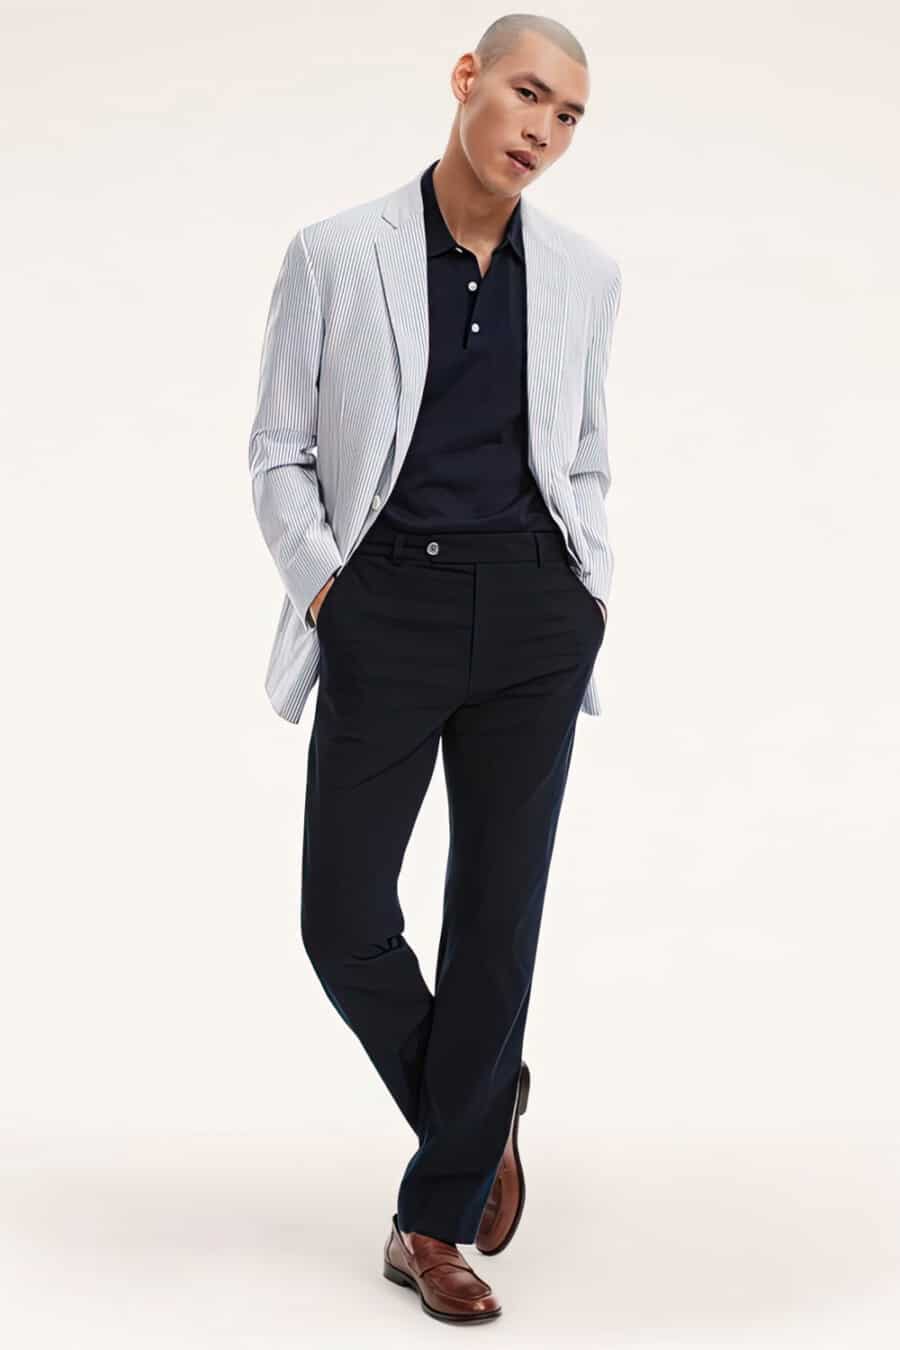 Men's navy pants, navy polo shirt, light blue seersucker blazer and tan leather penny loafers outfit